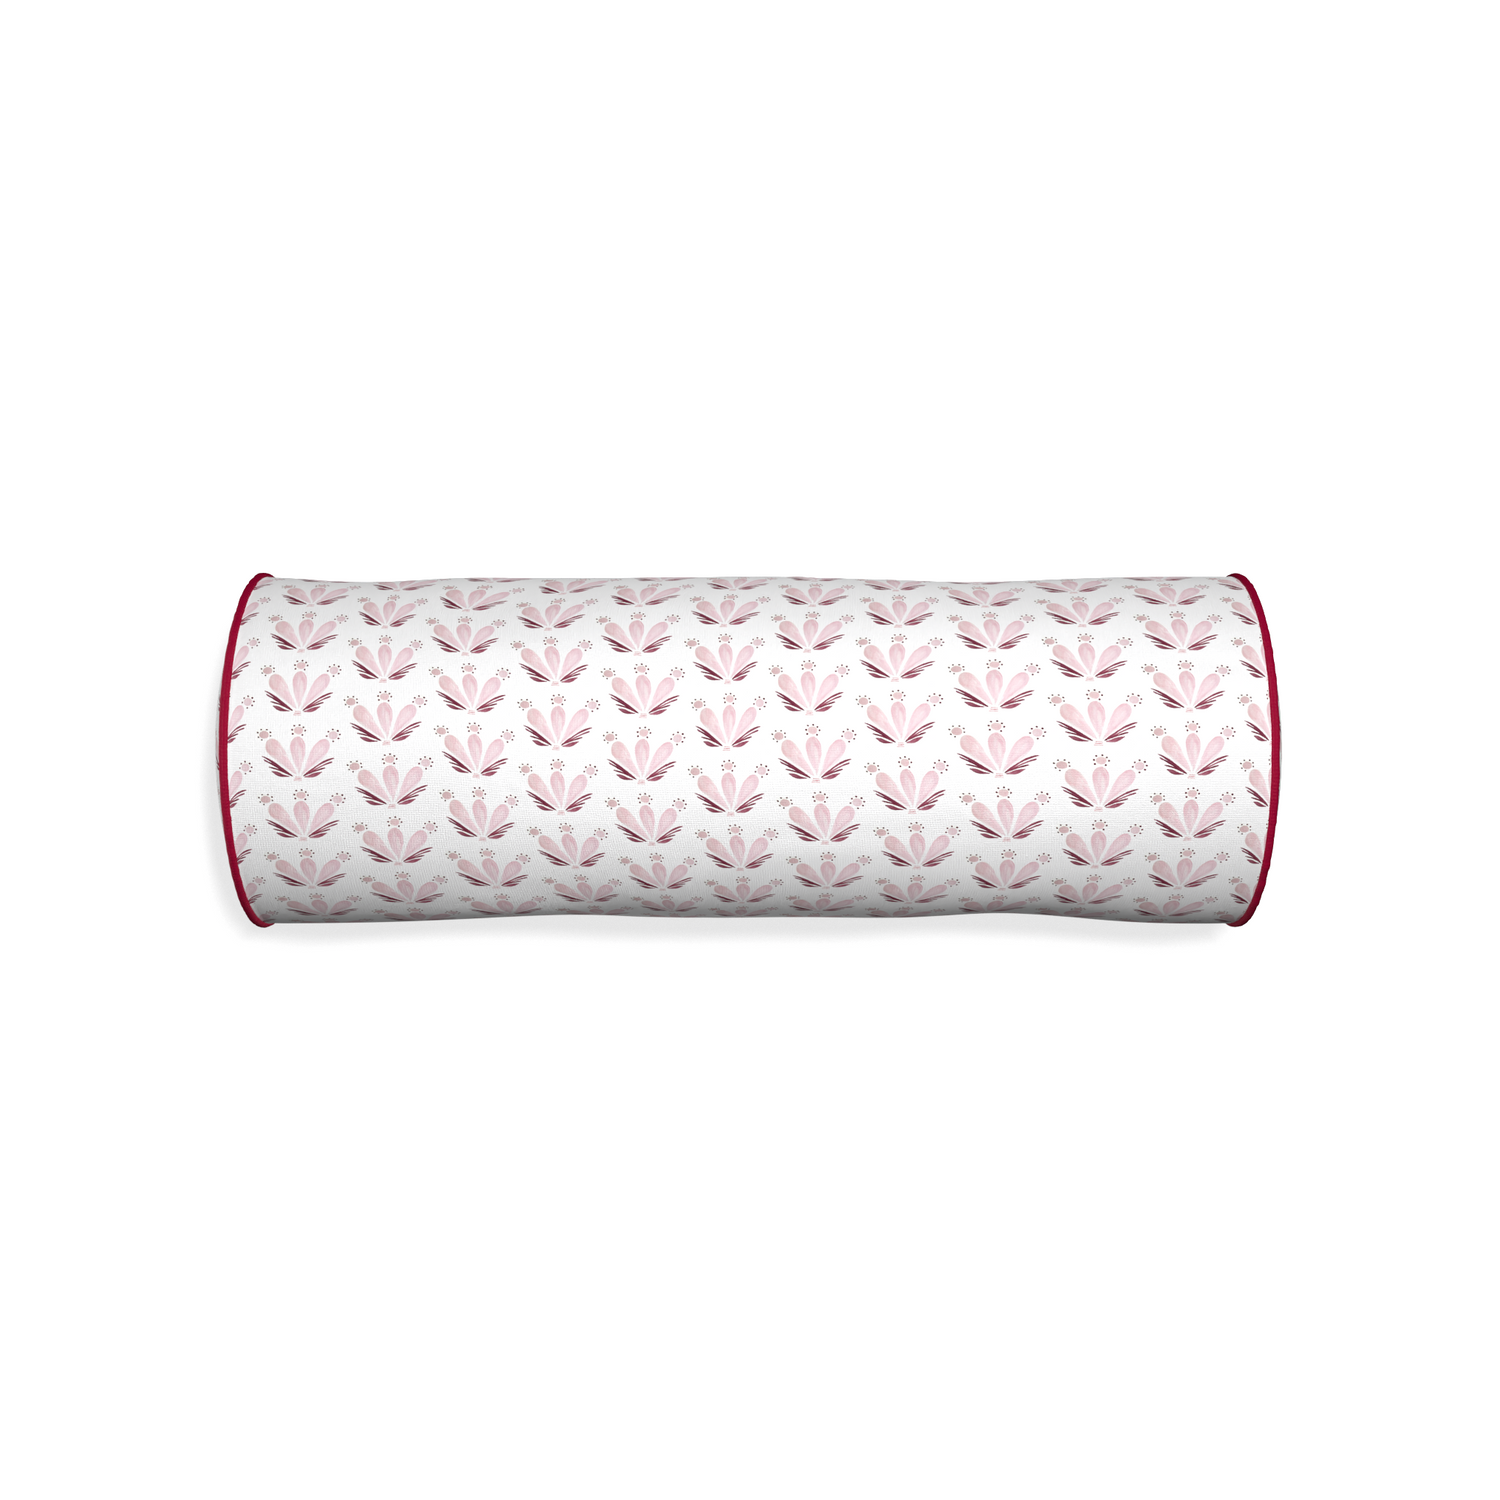 Bolster serena pink custom pink & burgundy drop repeat floralpillow with raspberry piping on white background